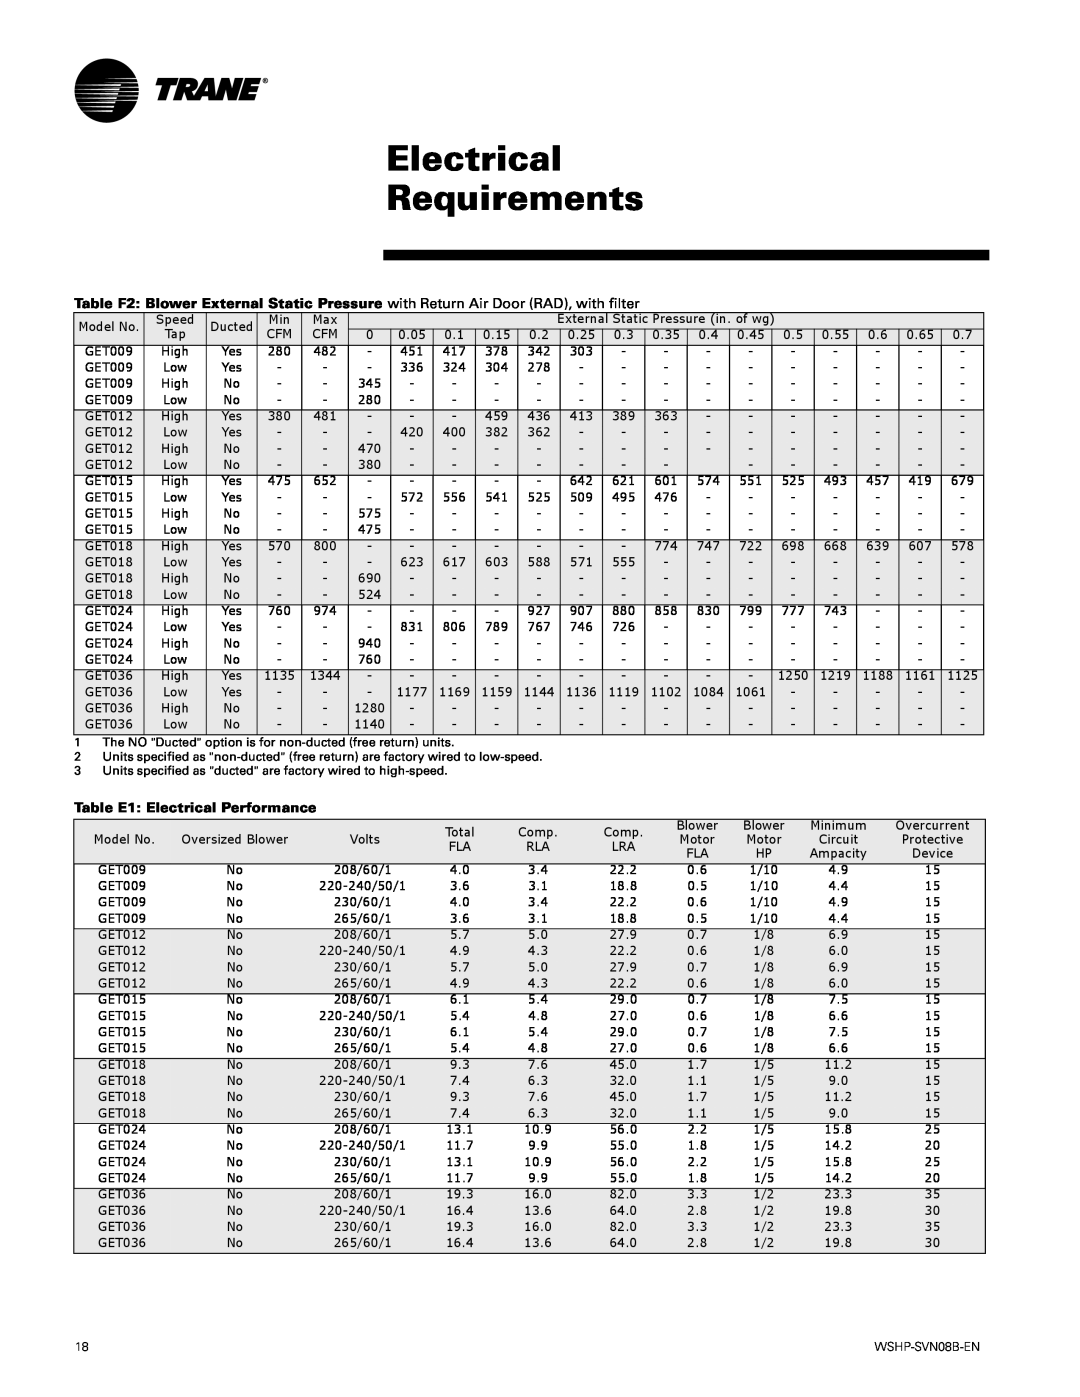 Trane GETB manual Electrical Requirements, Table E1 Electrical Performance 